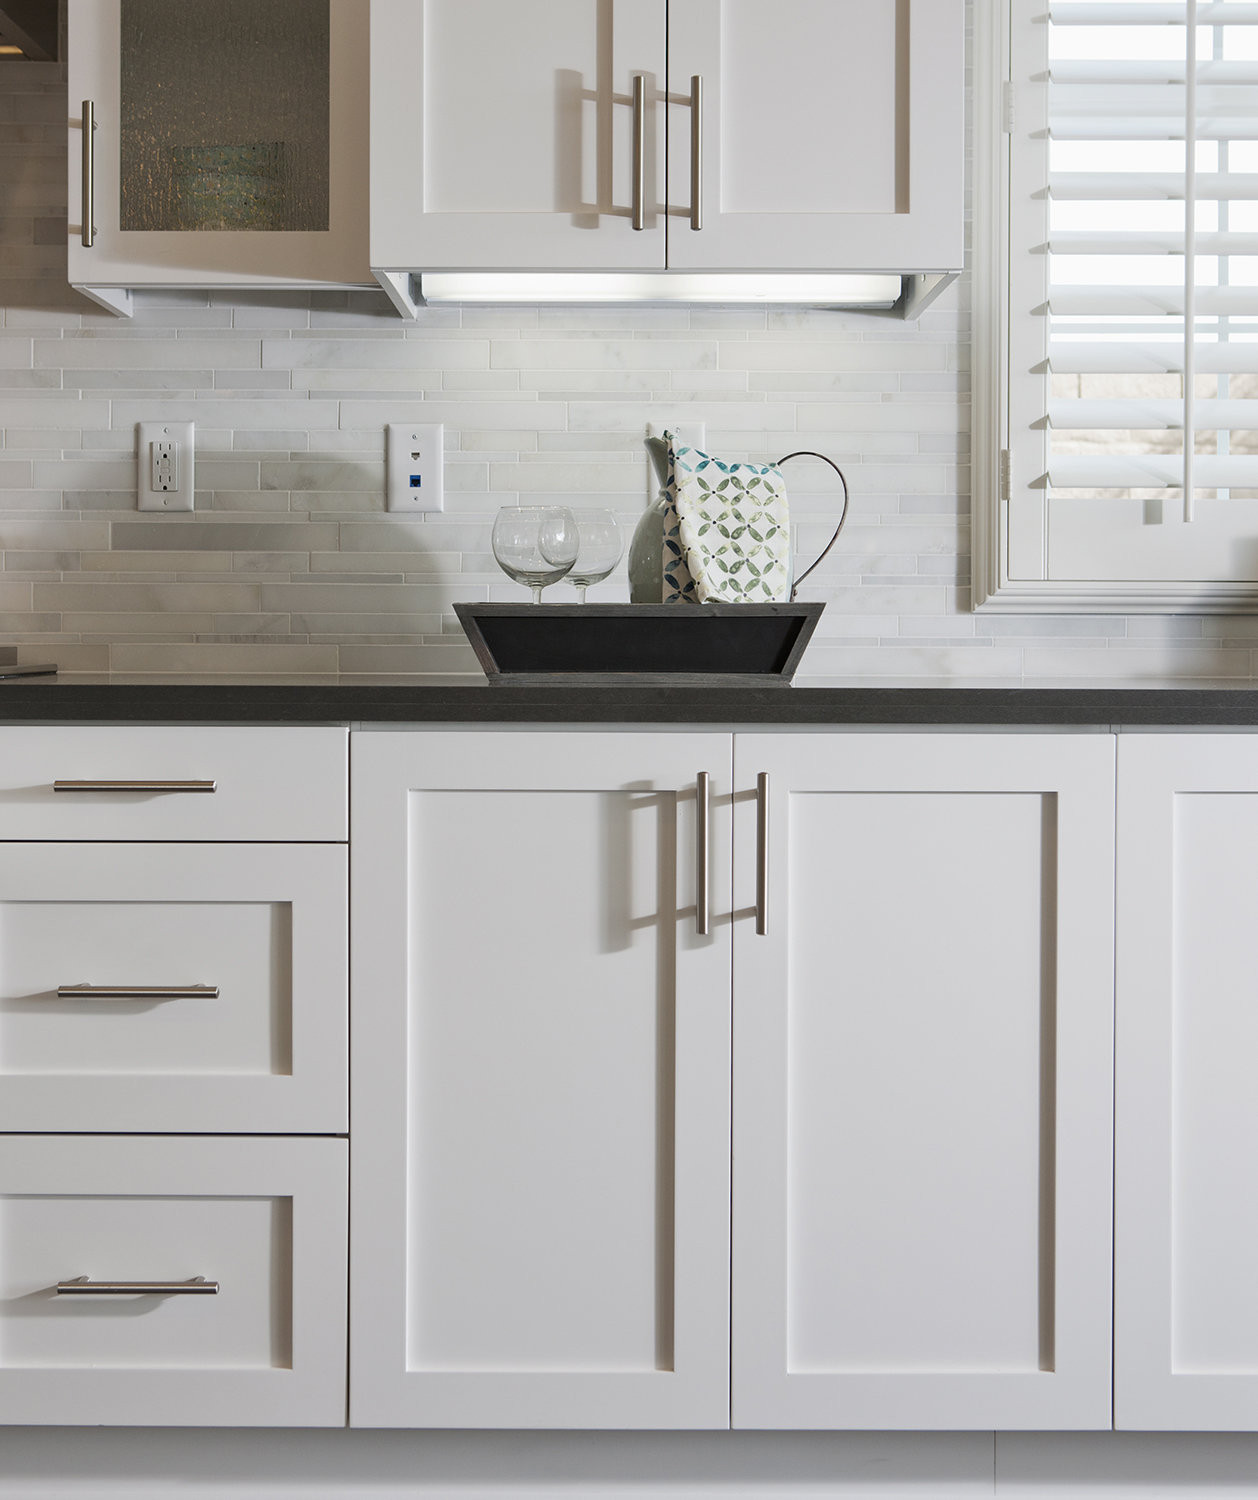 White Kitchen Cabinet Handles
 How to Spruce Up Your Rental Kitchen